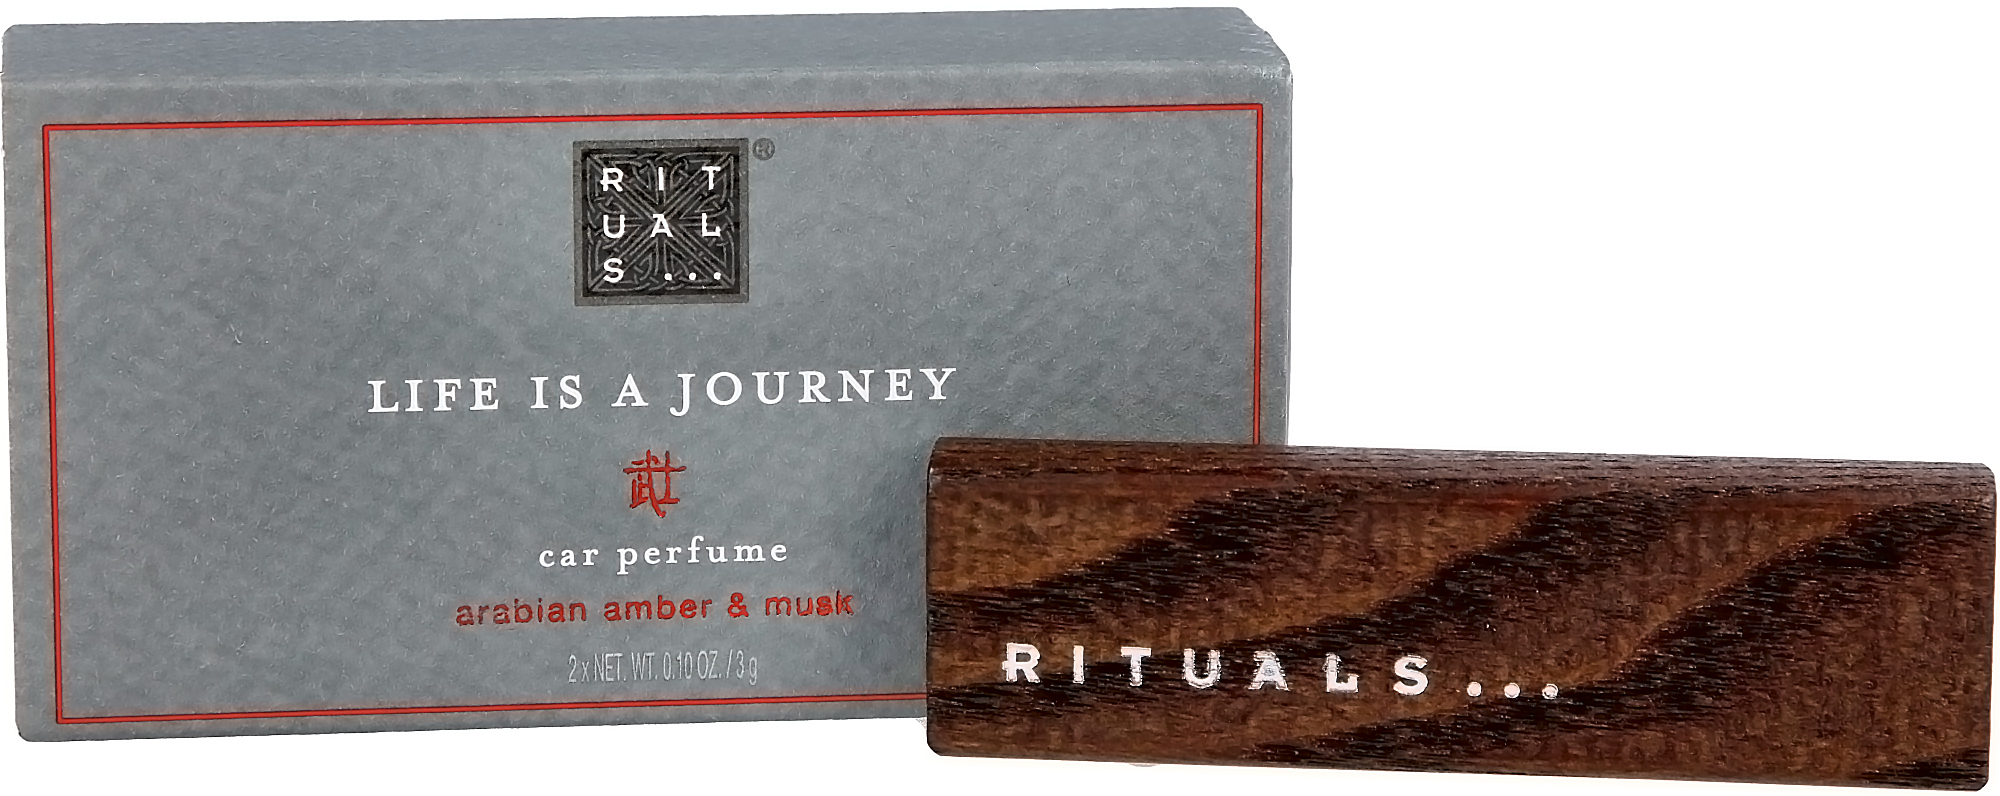 Woning Meerdere Bij zonsopgang Rituals Home Fragrance Life is a Journey Car Perfume | lyko.com